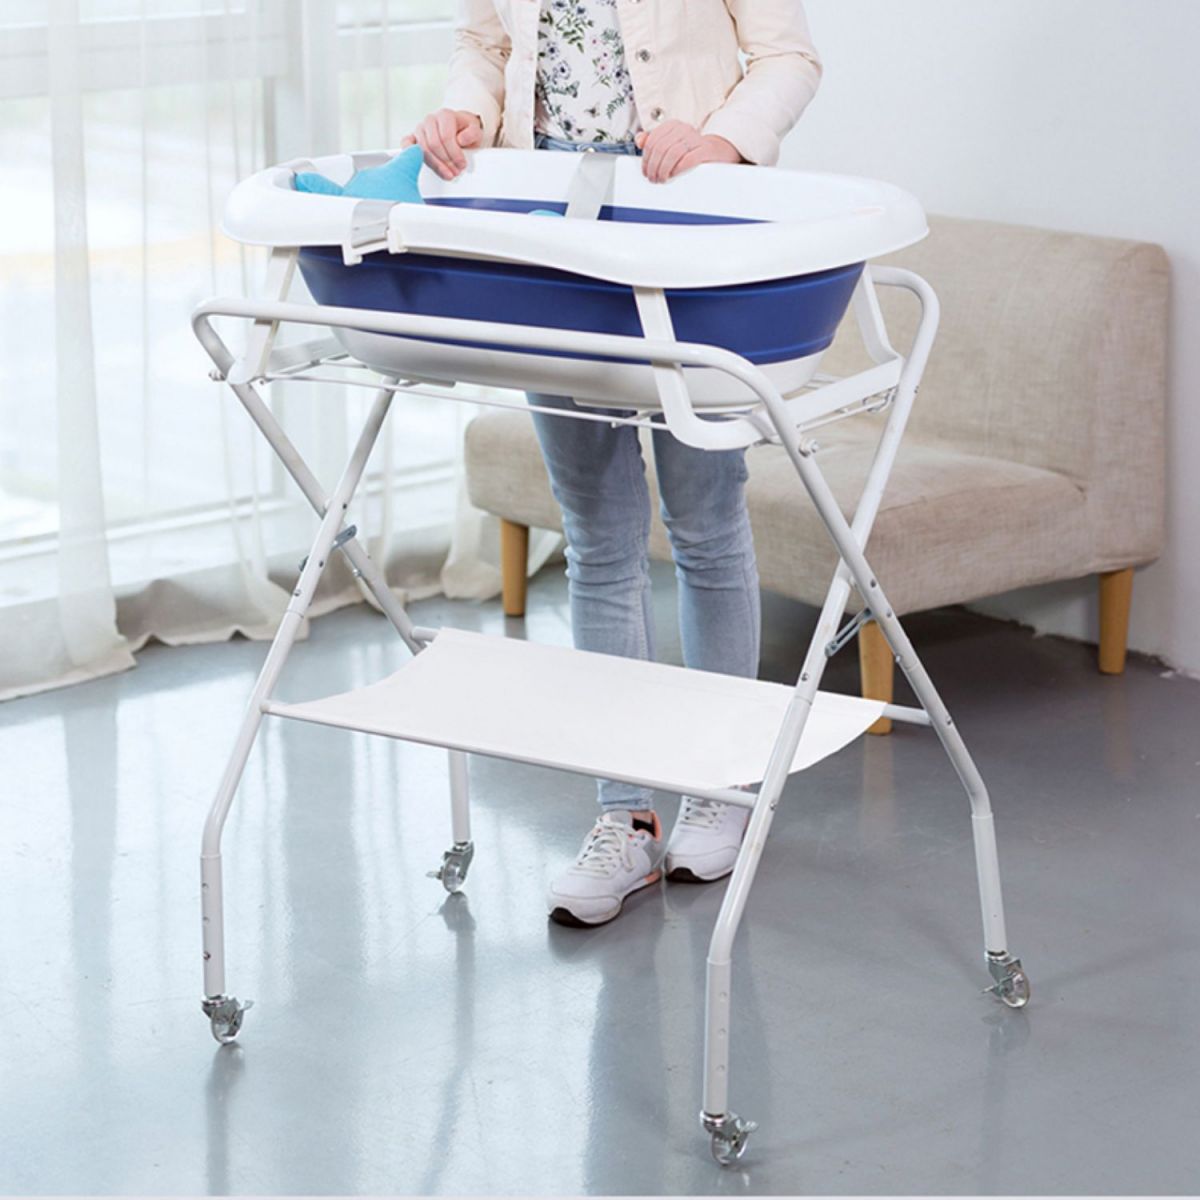 Portable Changing Table in White, Modern Baby Changing Table with Changing Pad